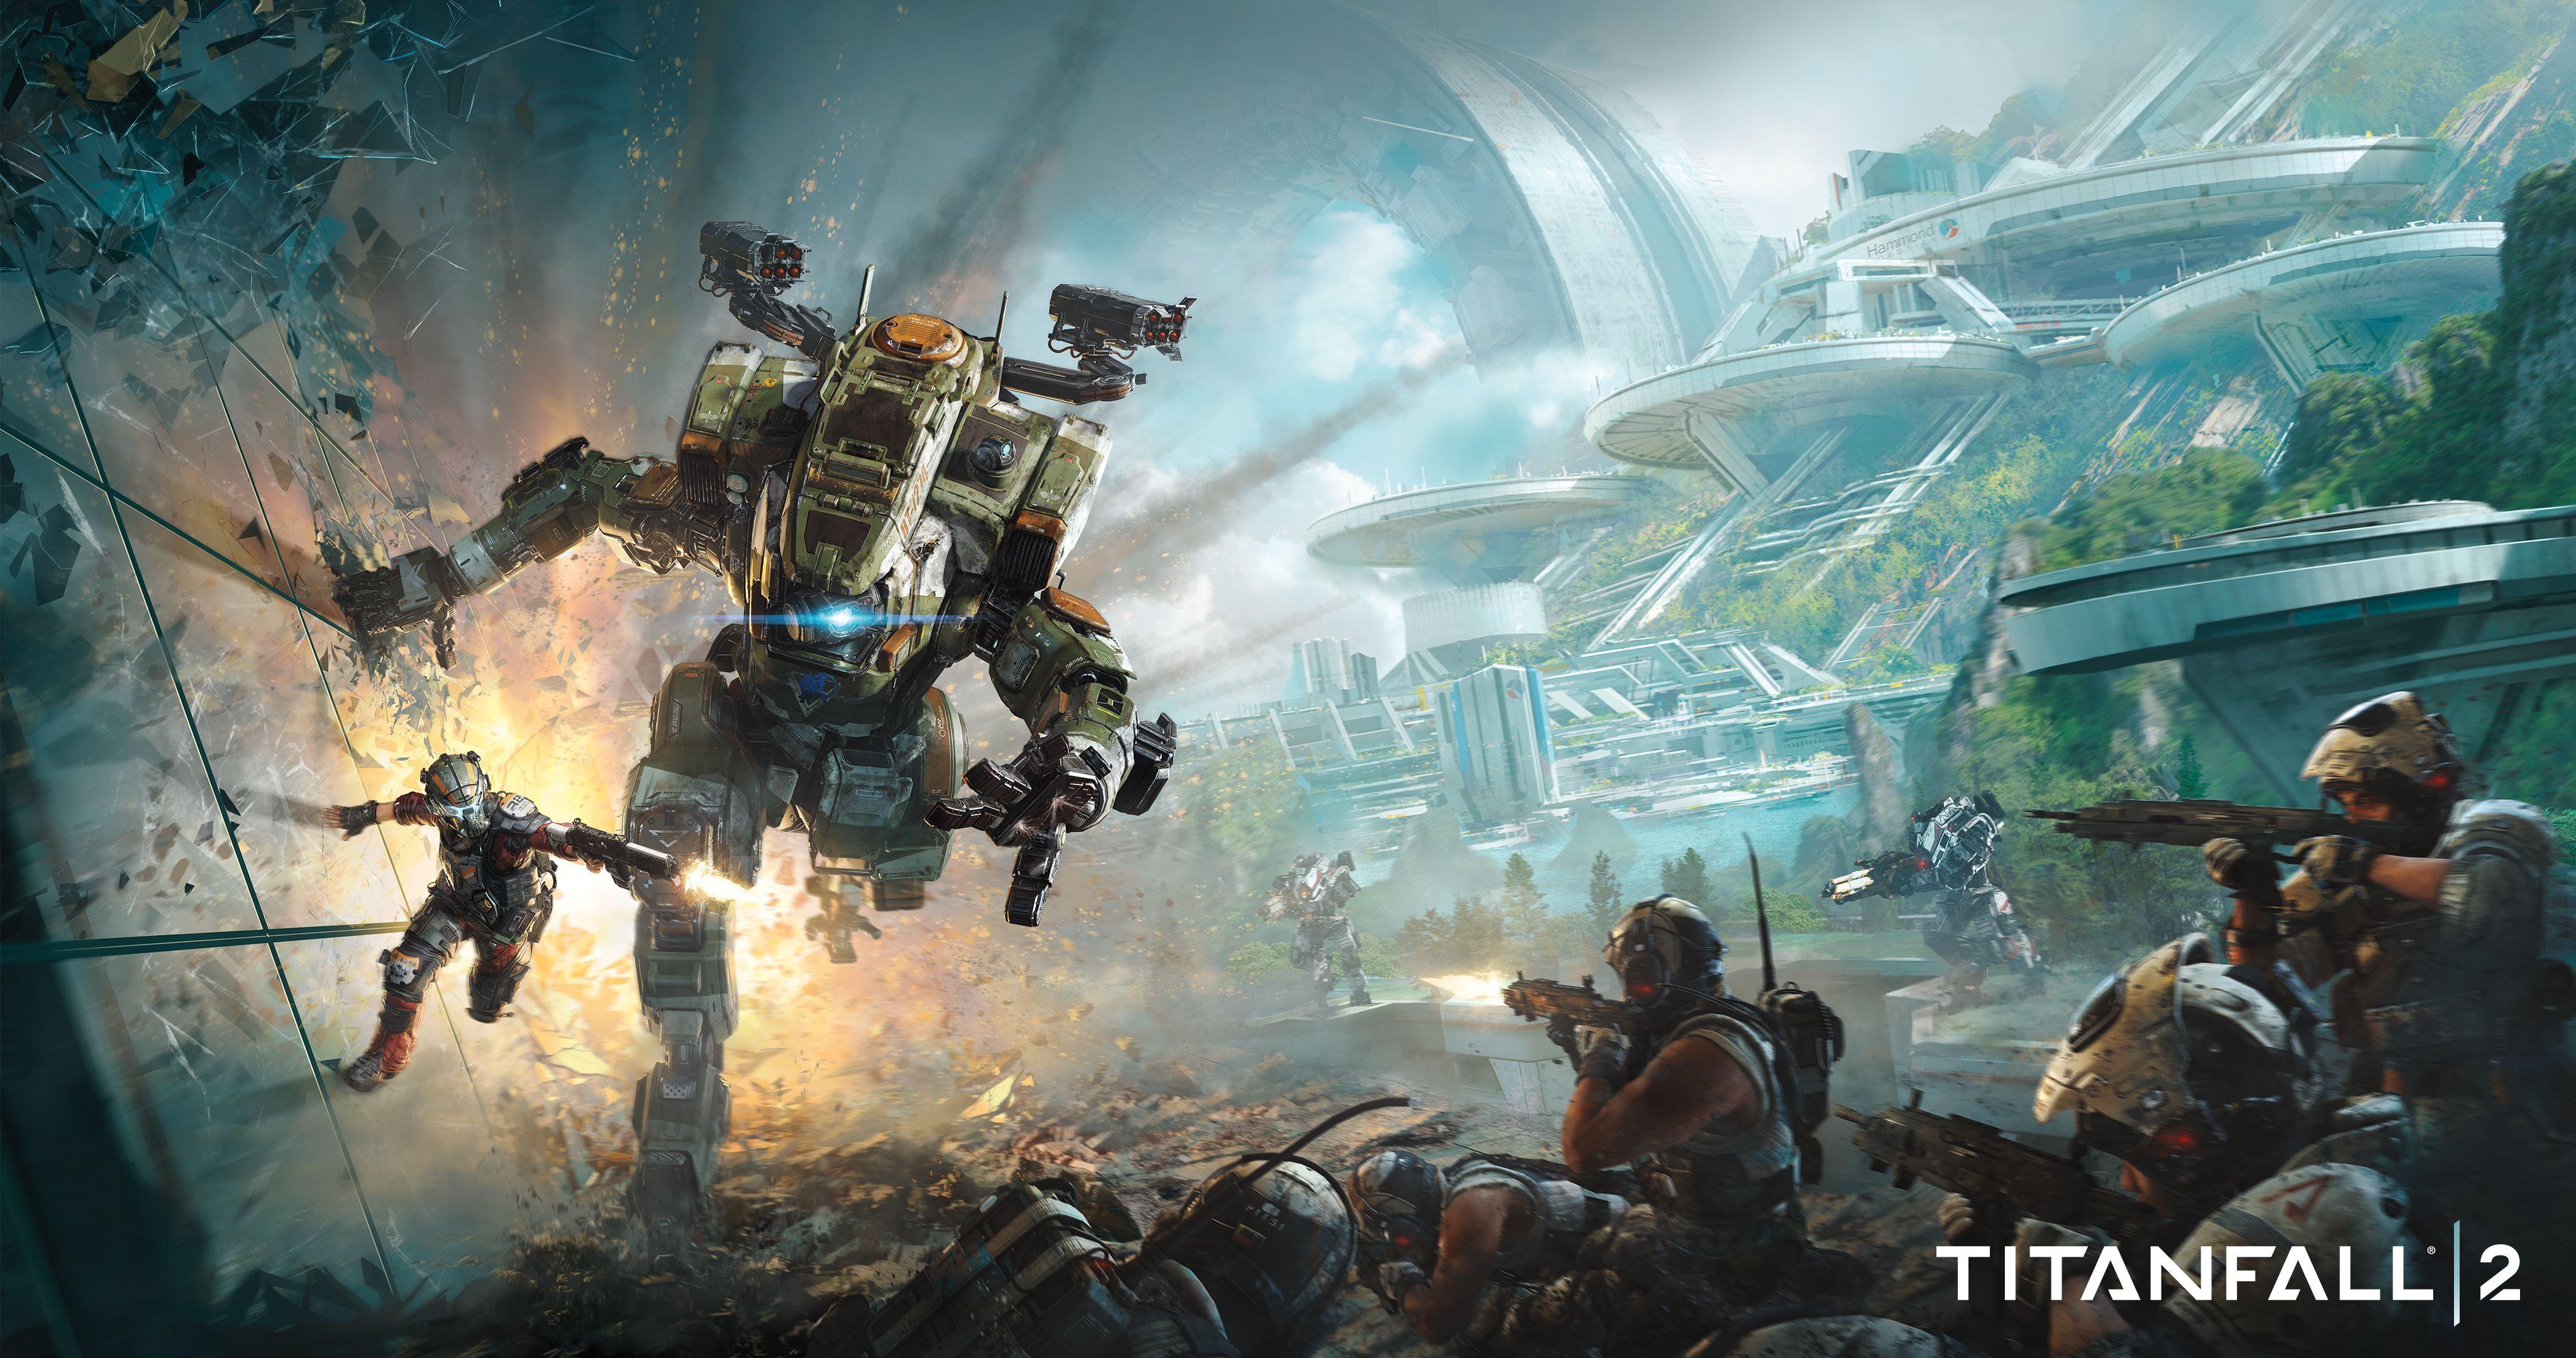 Titanfall 2 Wallpapers Top Free Titanfall 2 Backgrounds Wallpaperaccess